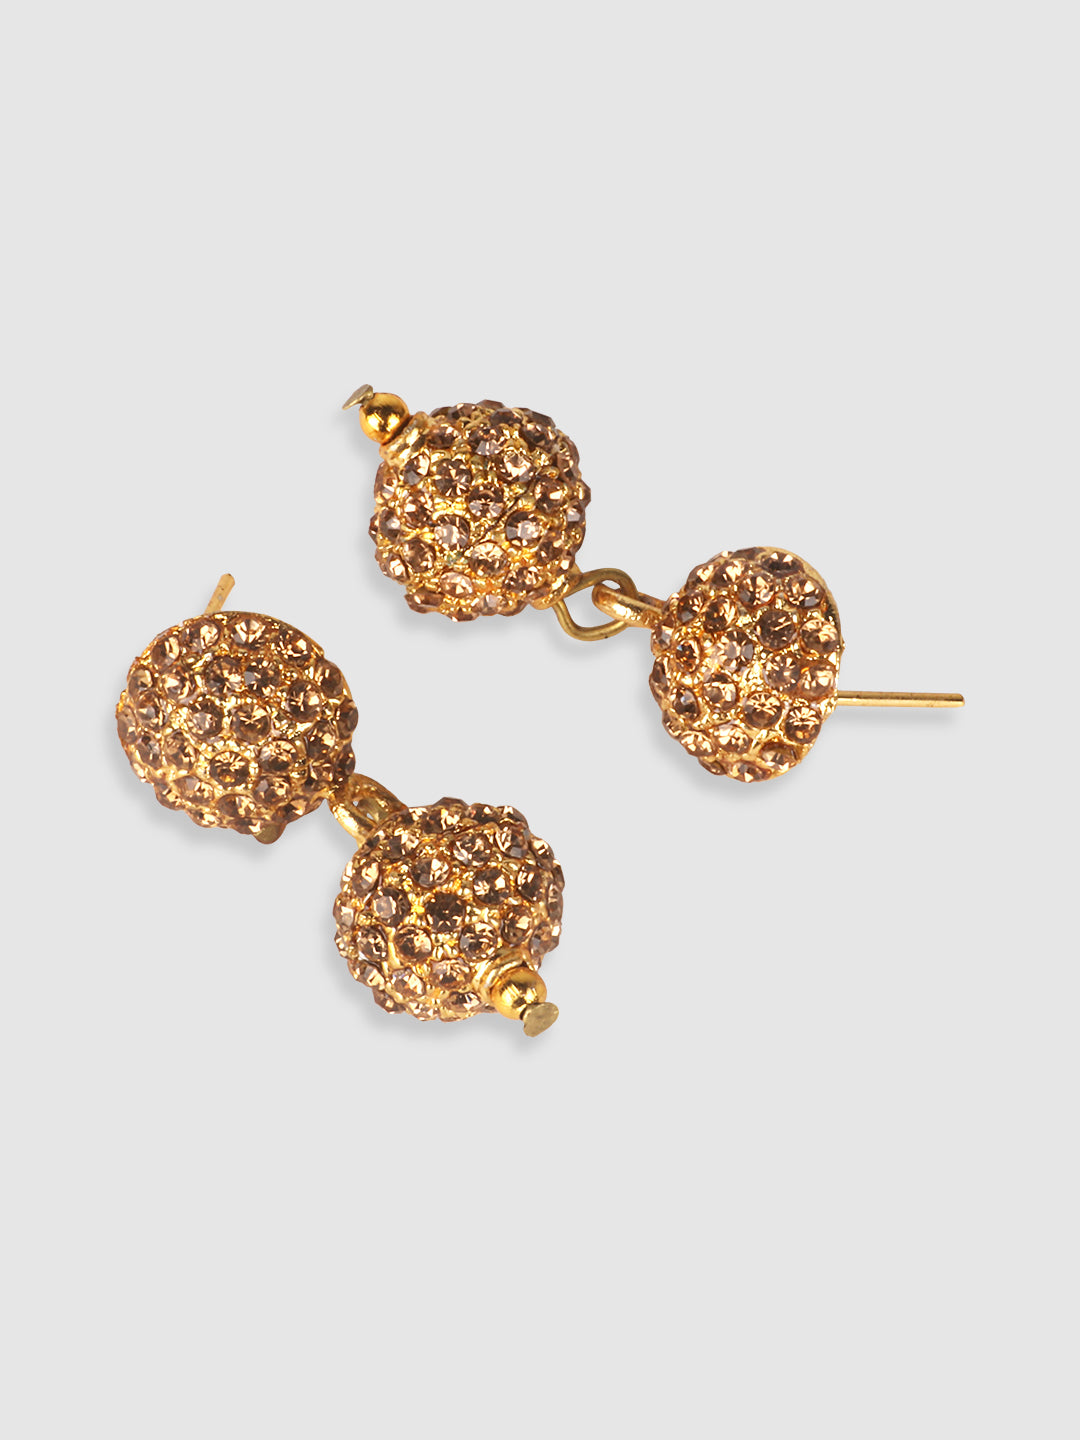 Gold-Plated Stone-Studded Tribal Jewelry Set